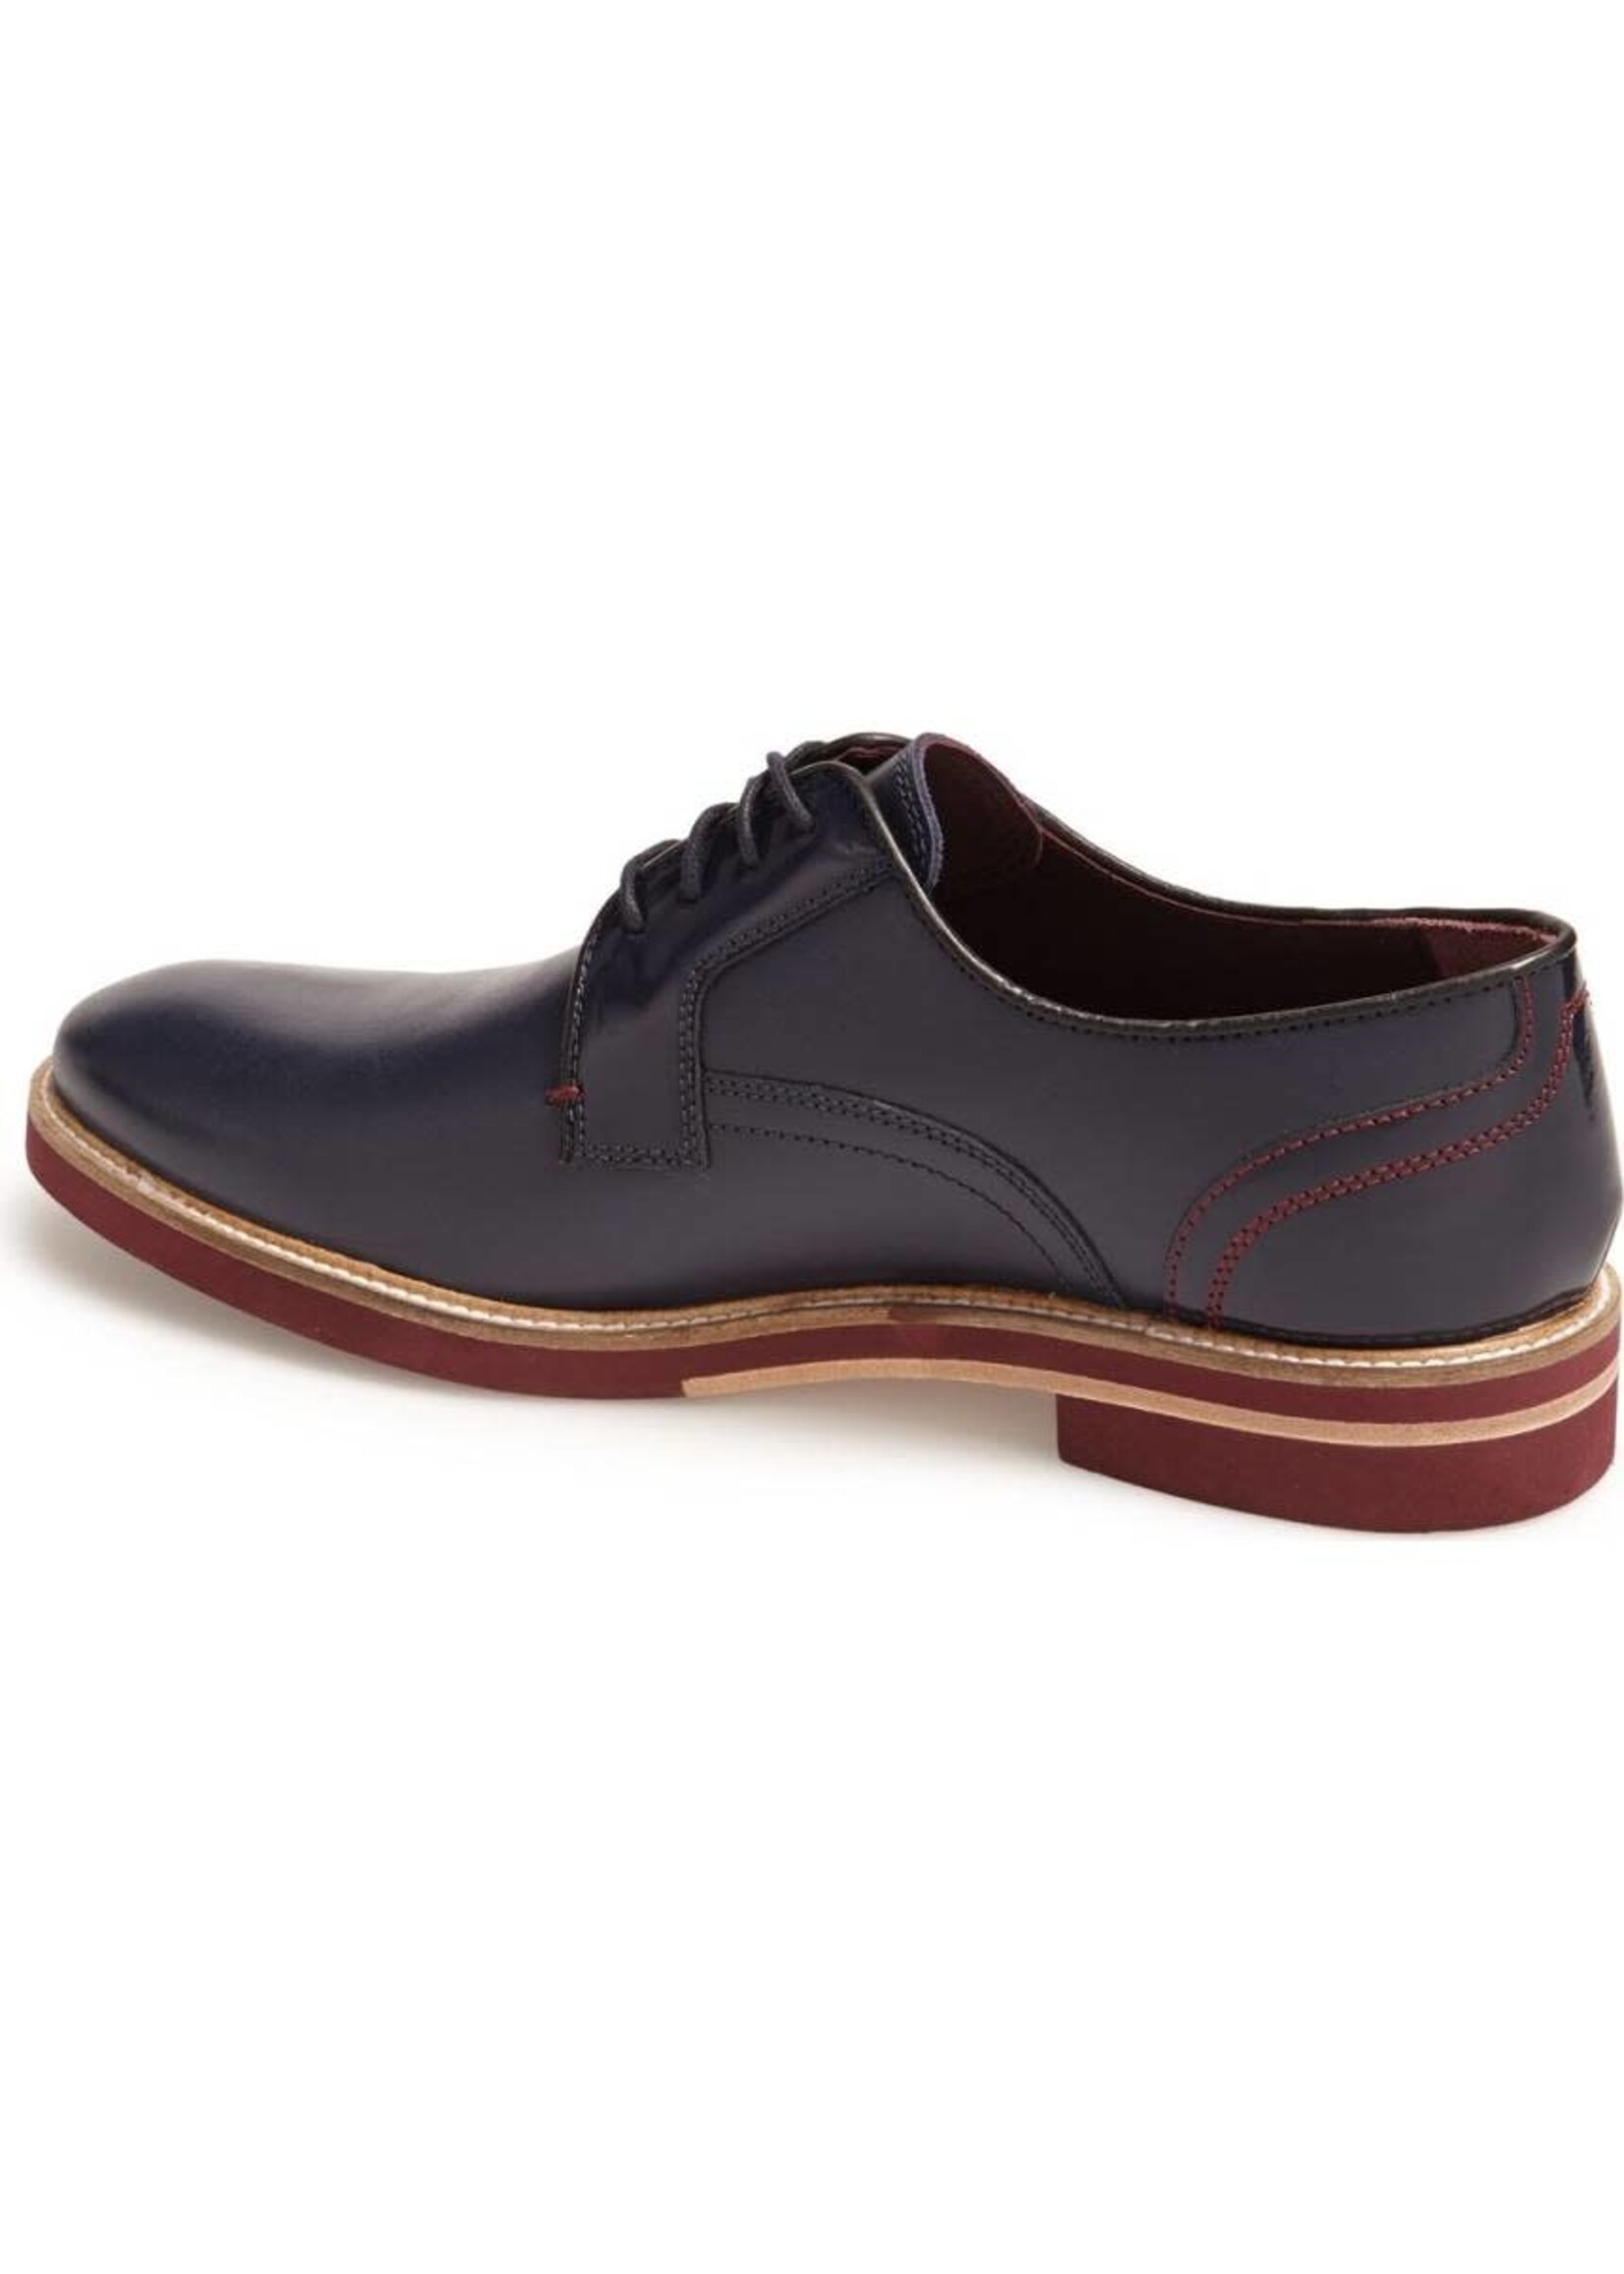 Ted Baker Leather Lace-up Shoes, 11.5M